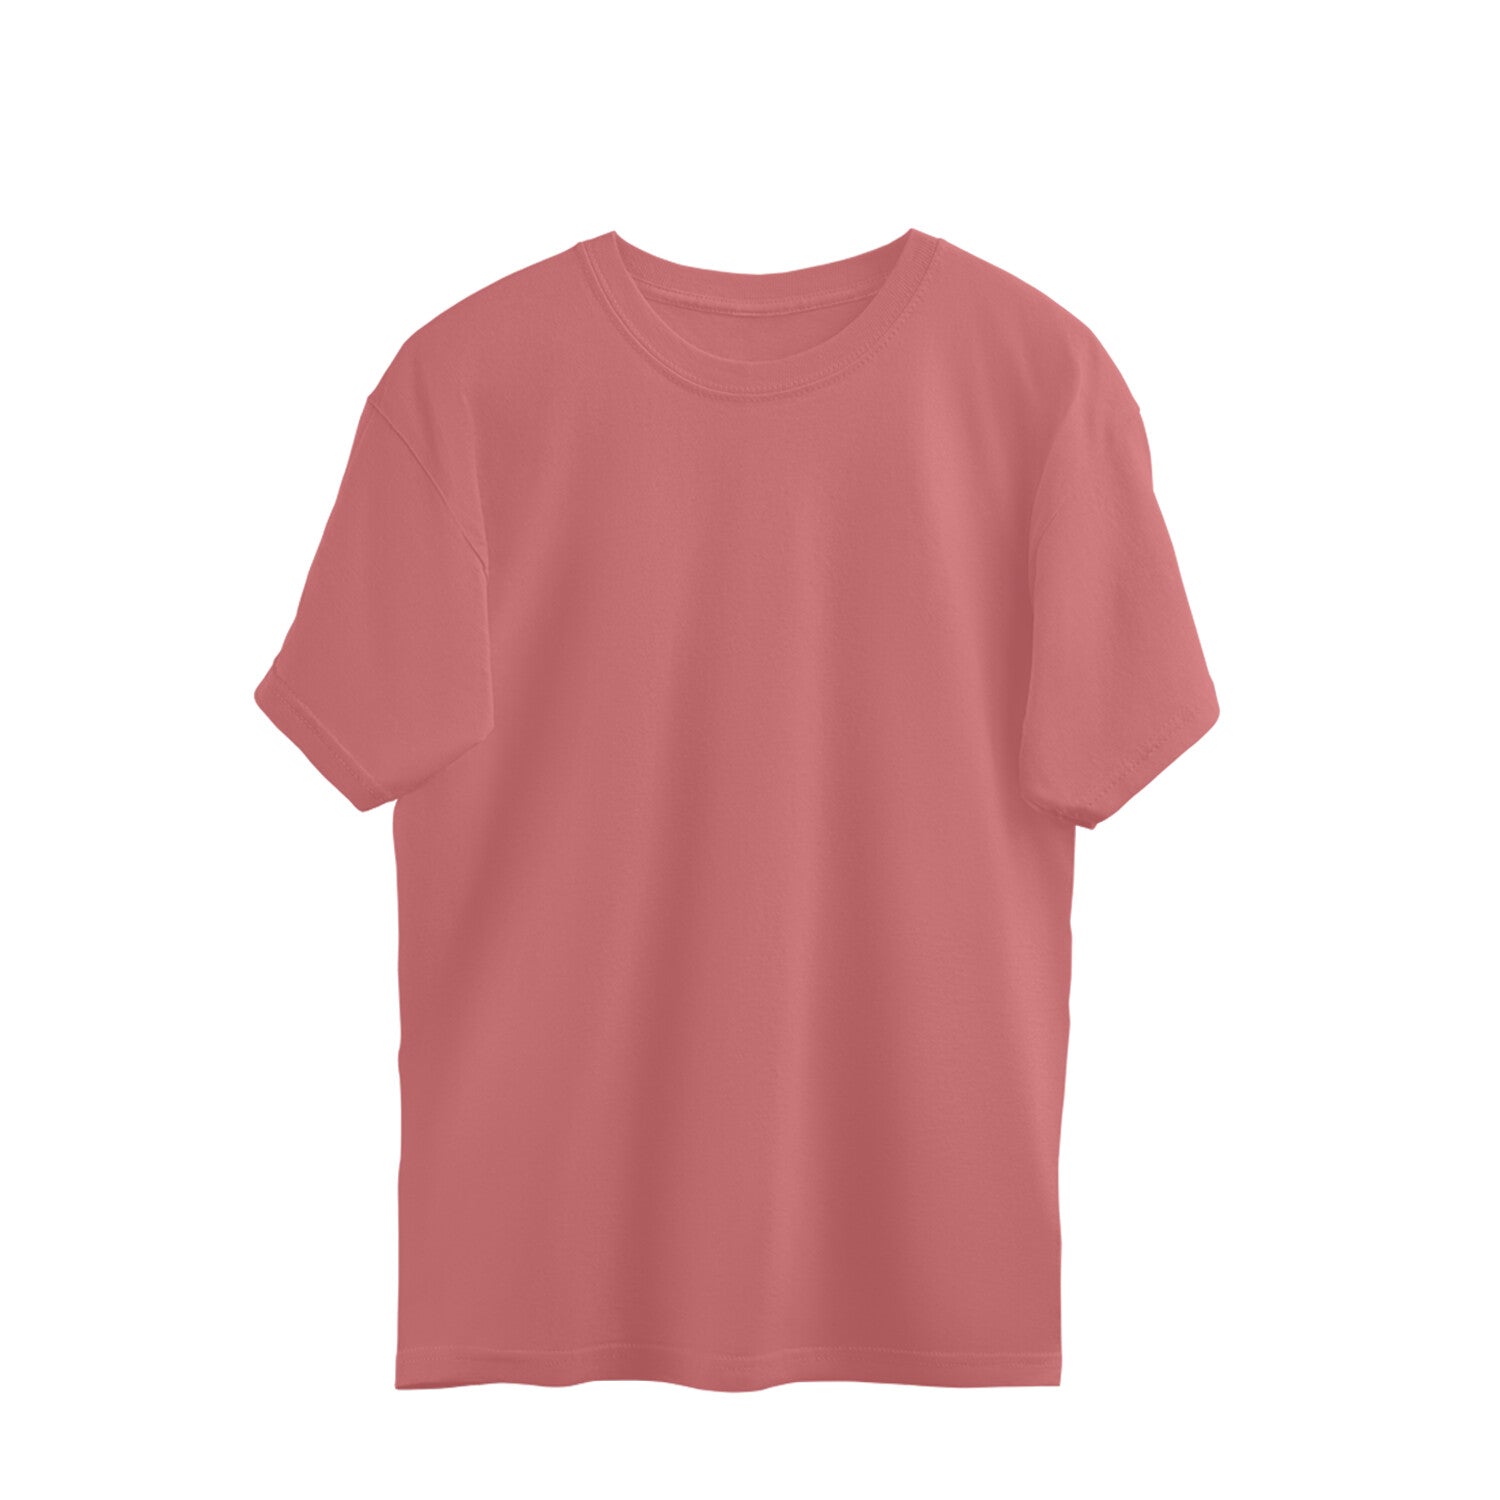 Men's Dusty Rose Over-Sized T-shirt